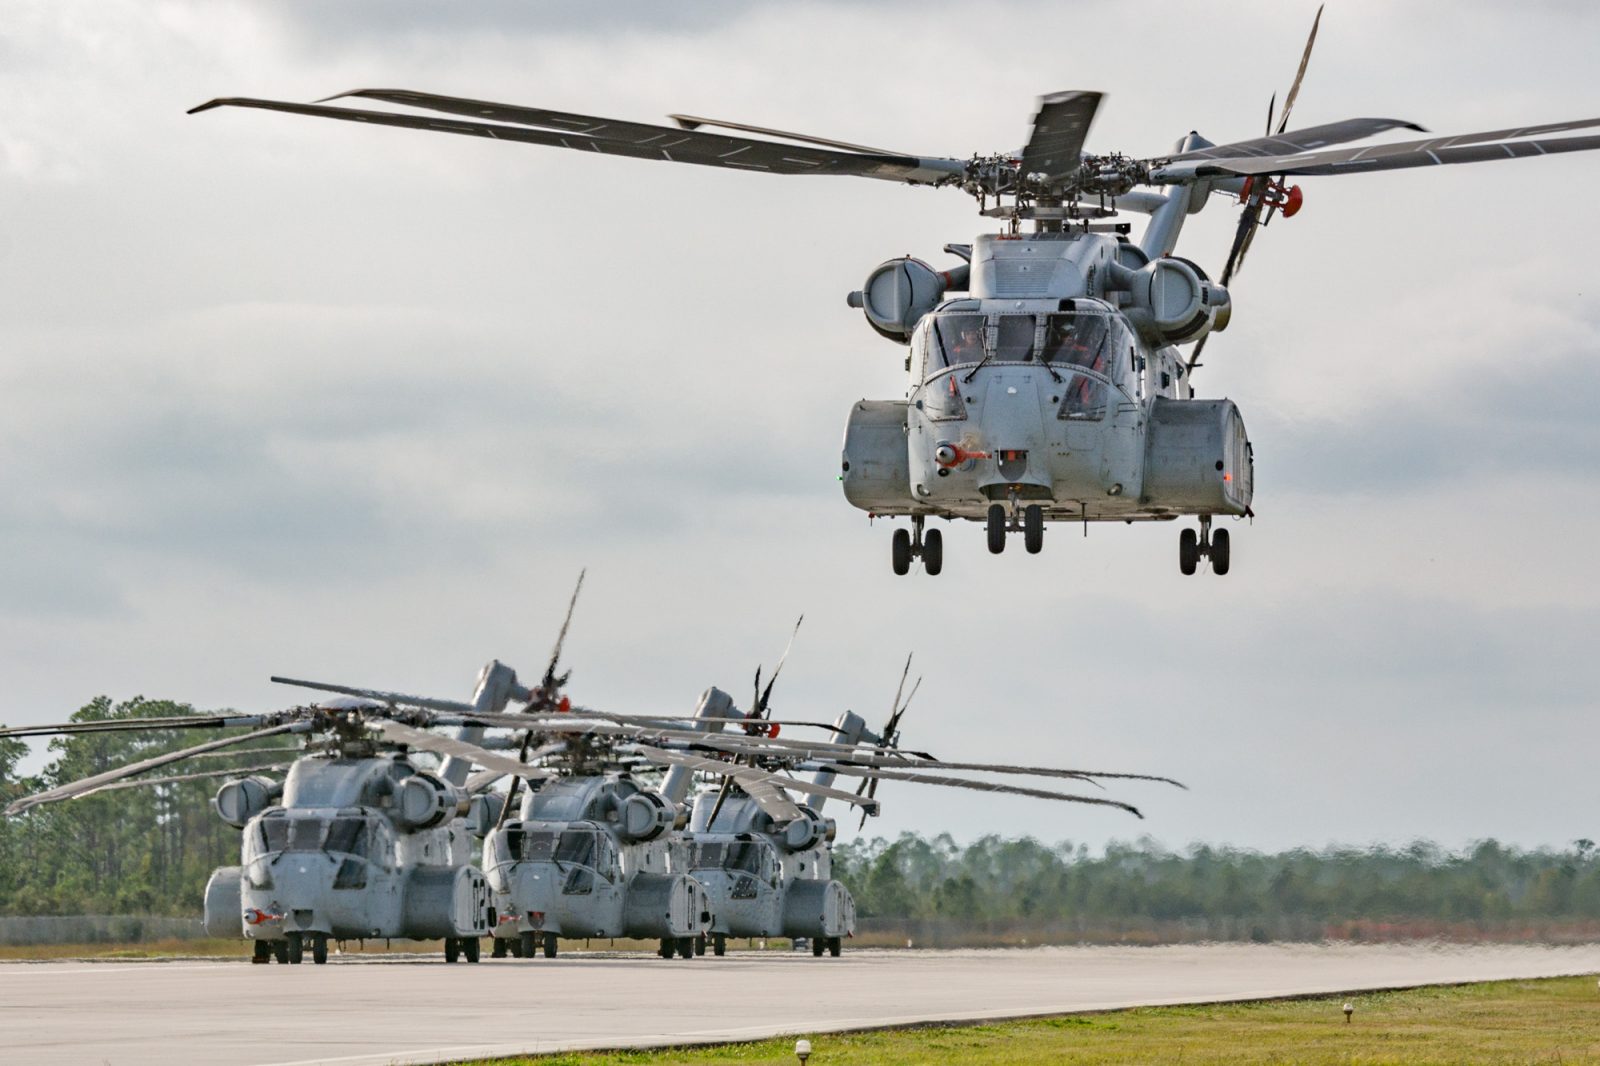 Top 10 Largest Military Transport Helicopters